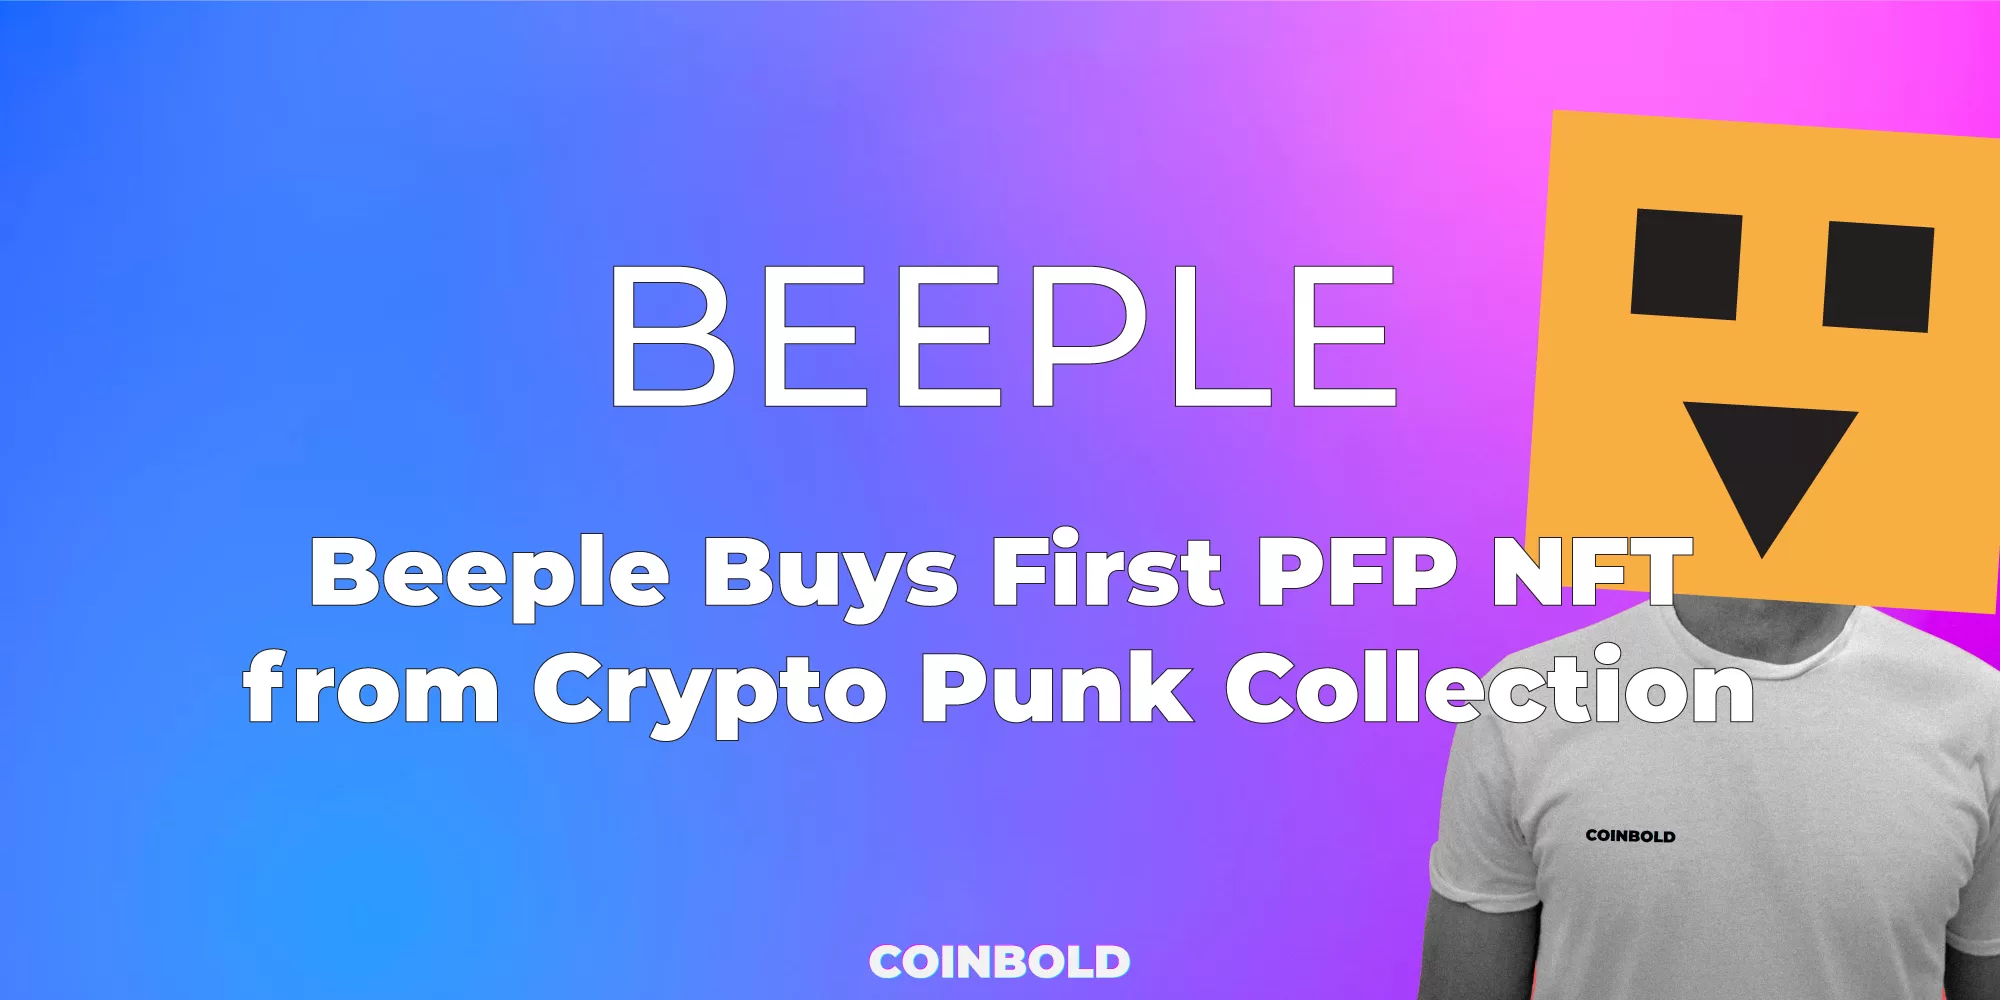 Beeple Buys First PFP NFT from Crypto Punk Collection